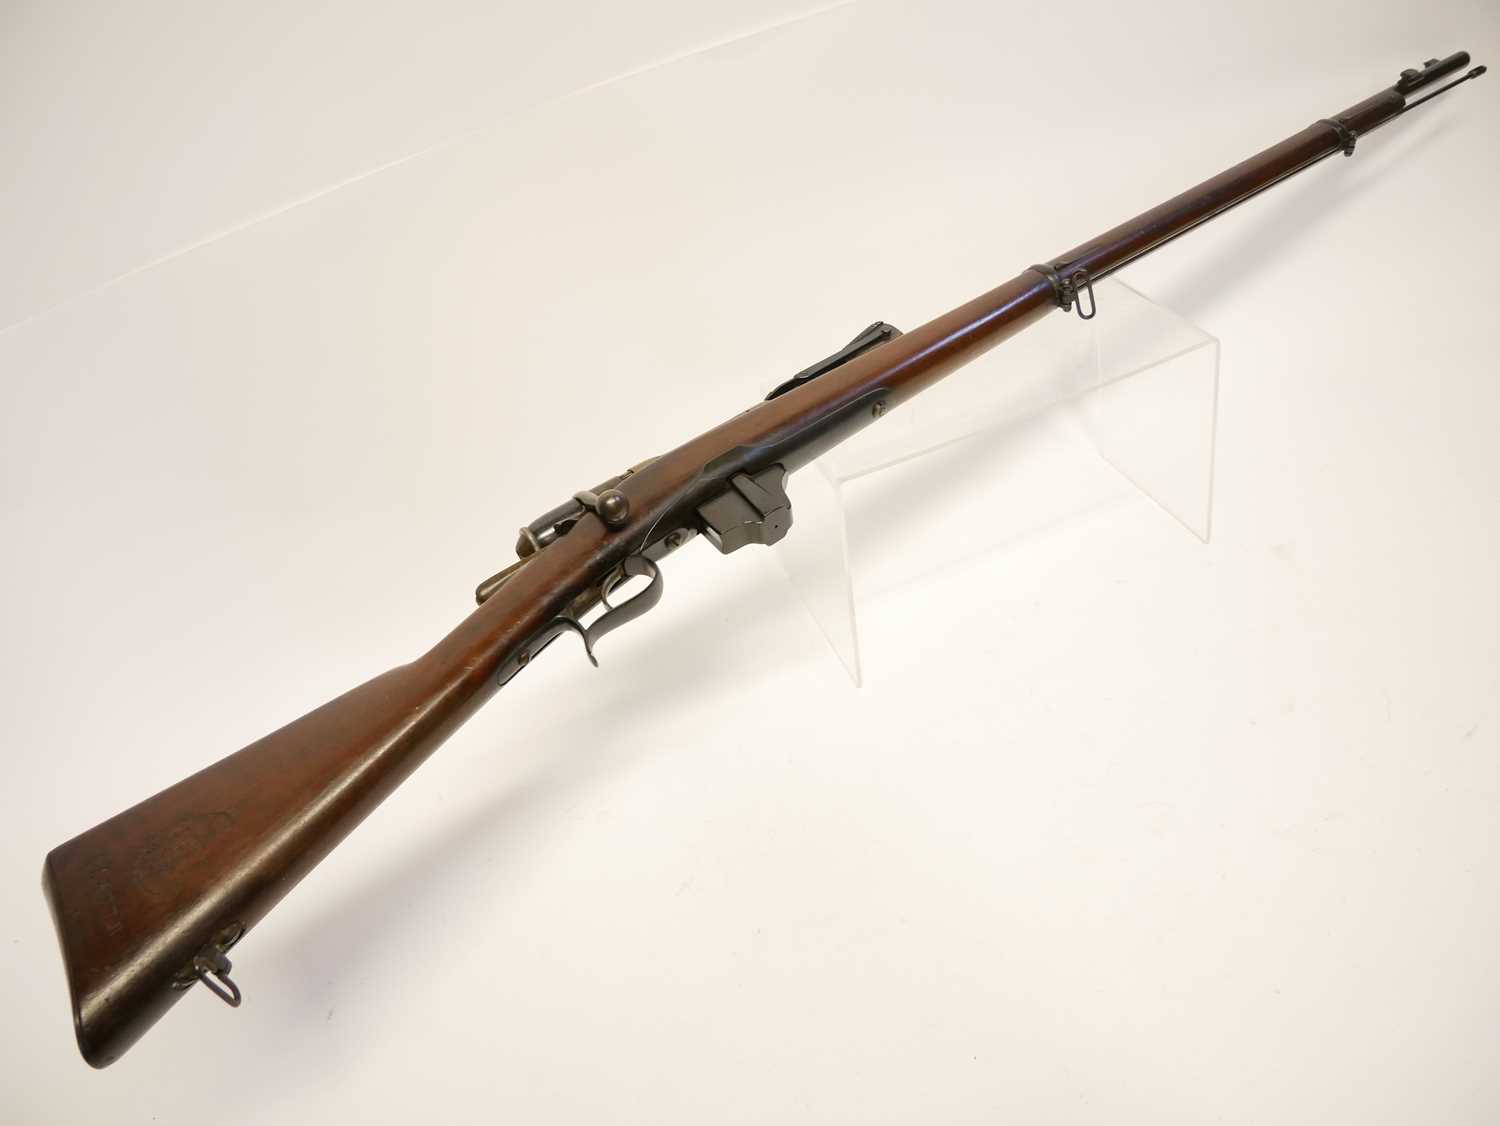 Italian Vetterli M.1870/87 10.35x47R bolt action rifle, serial number 5778, 33.5inch barrel fitted - Image 11 of 17